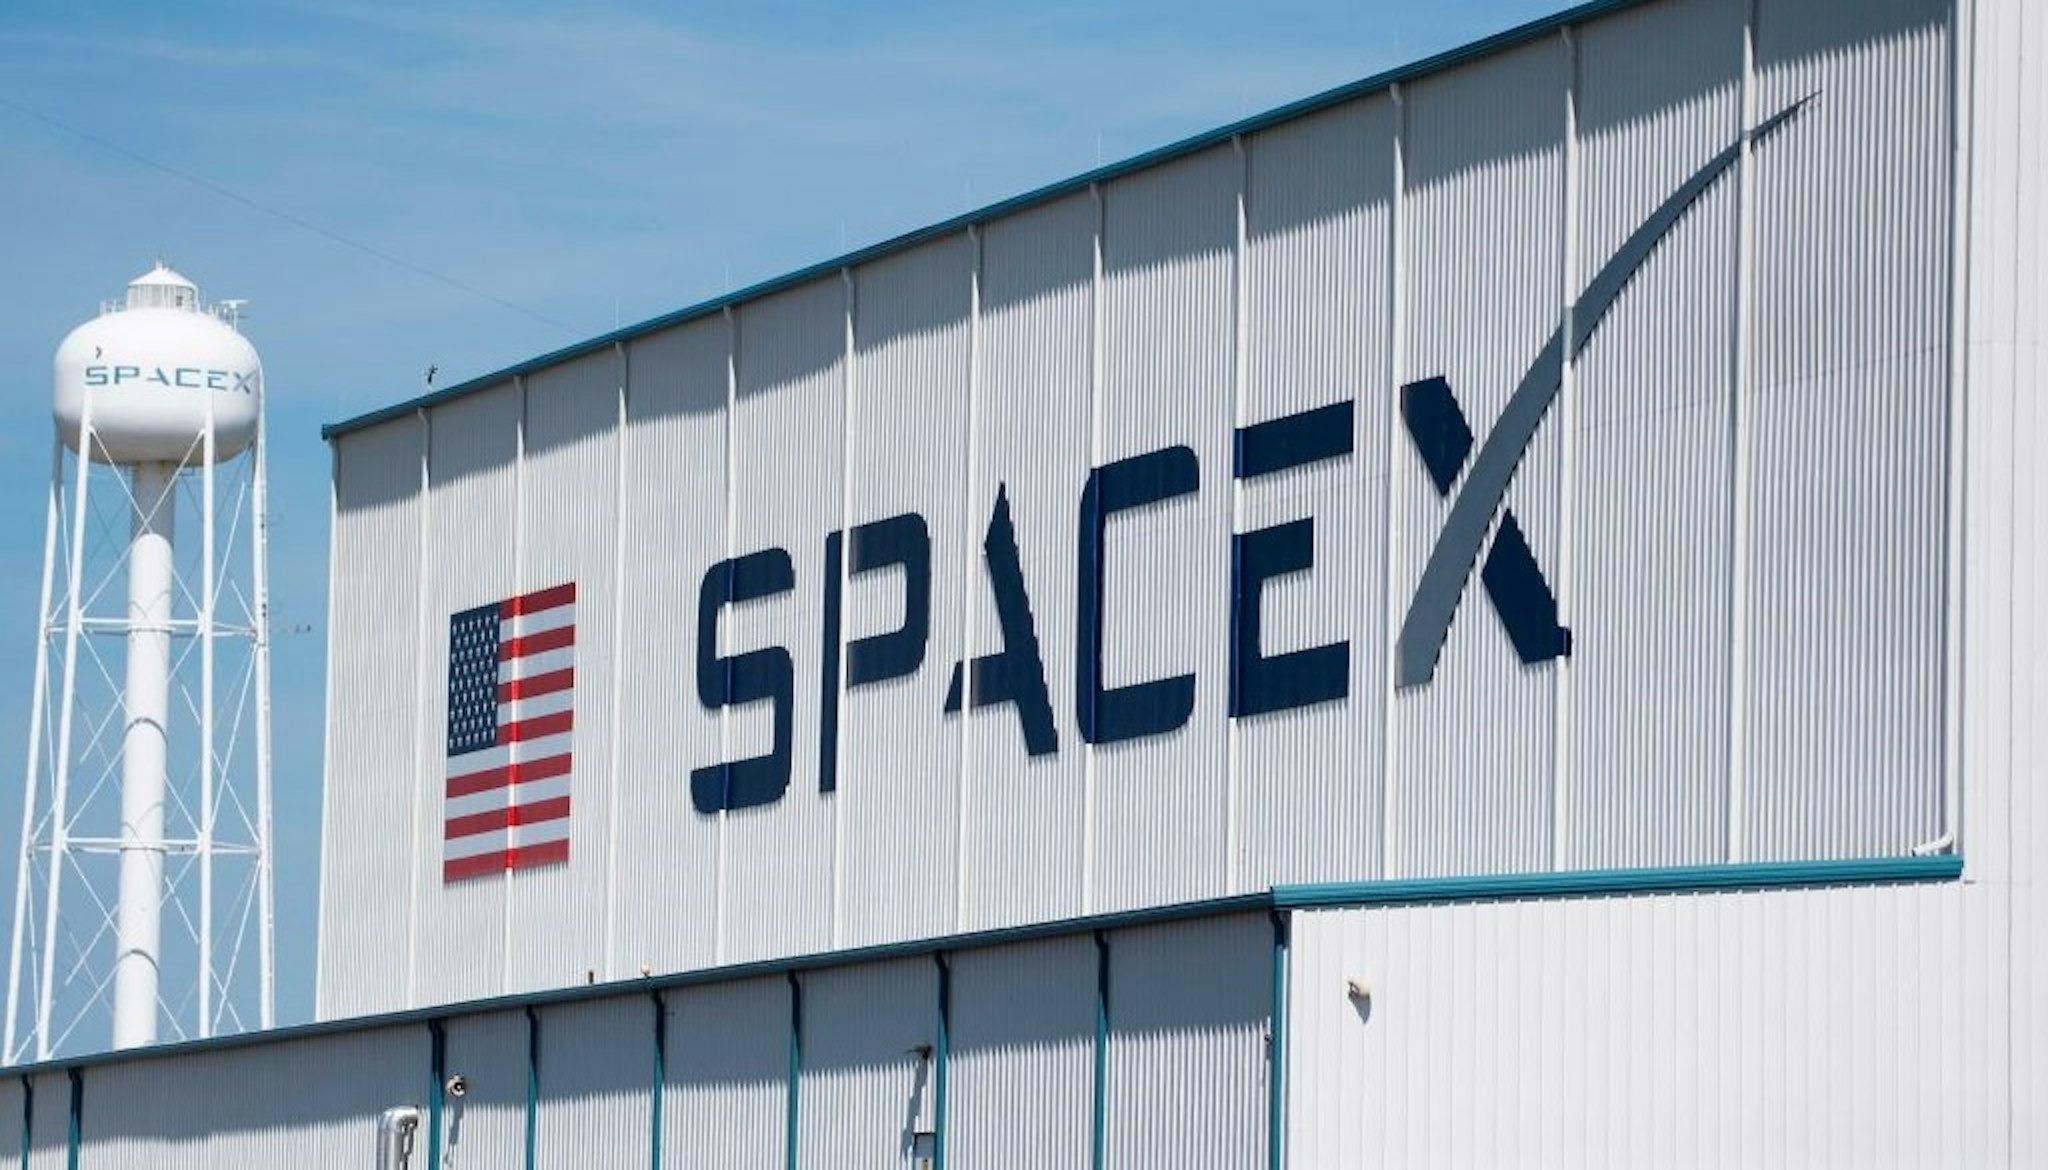 The SpaceX hangar on Pad 39A on March 1, 2019, at Kennedy Space Center in Florida on March 1, 2019.